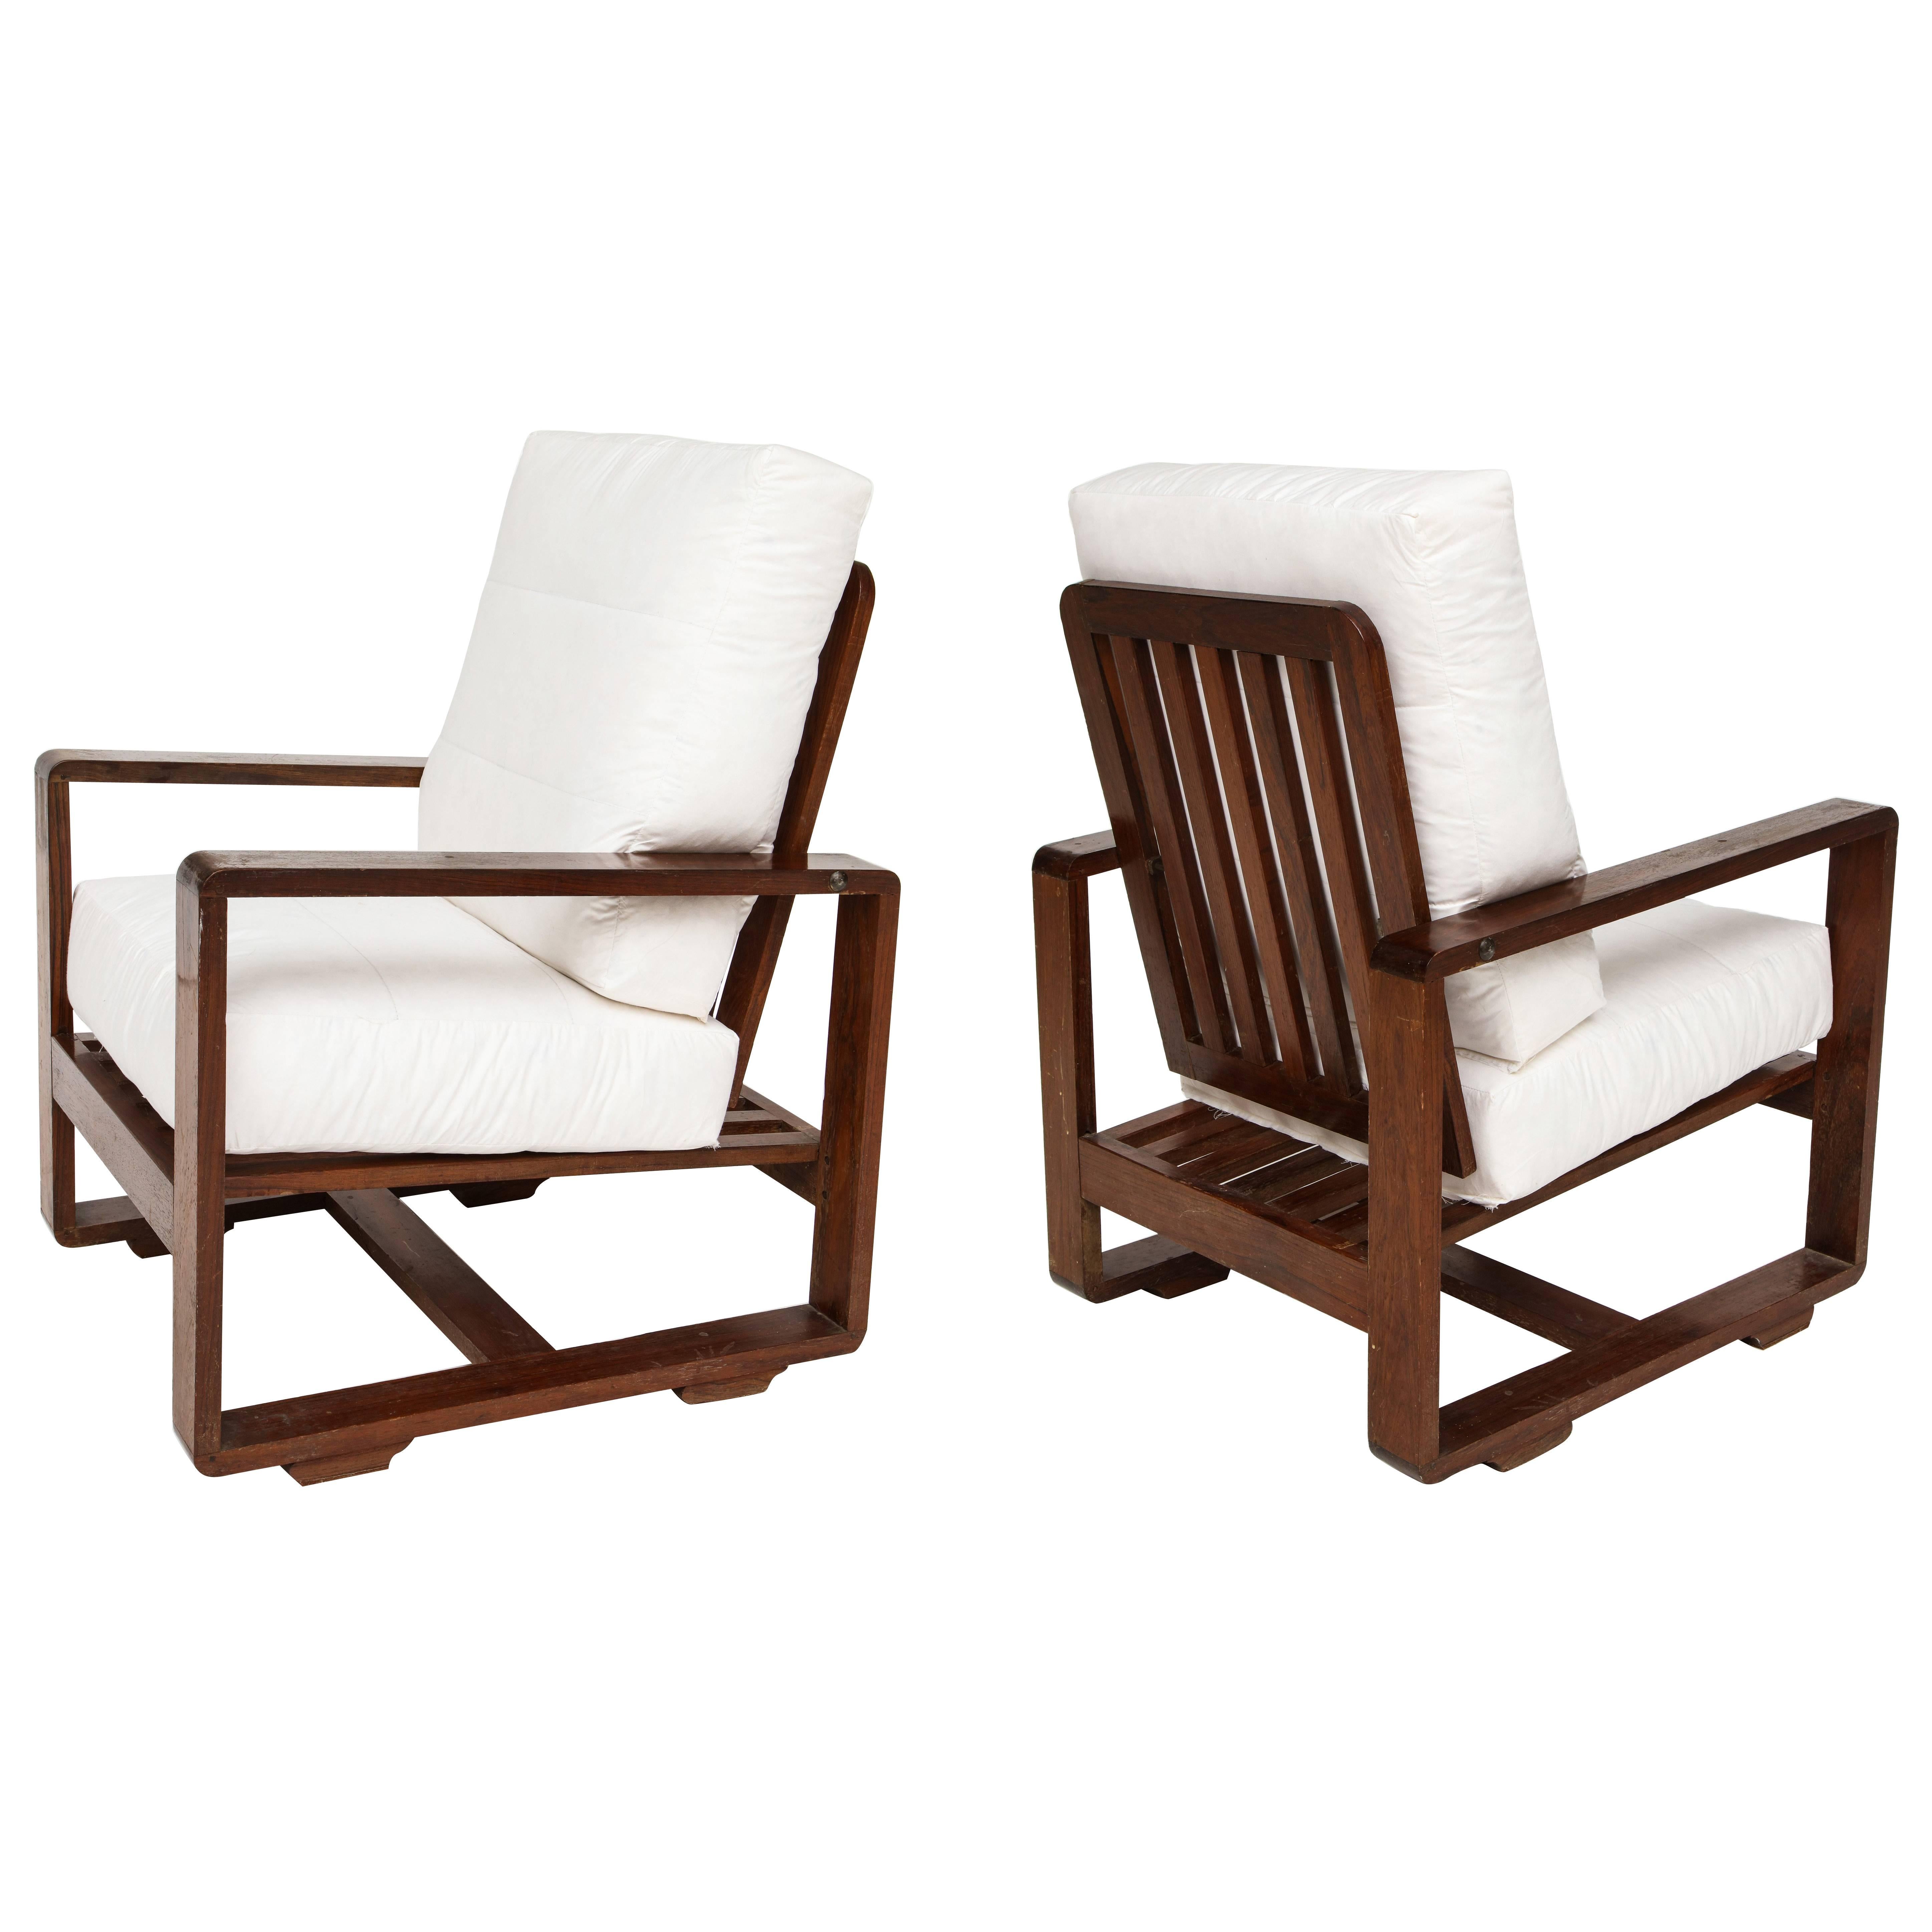 Sornay Style Deco Rosewood Lounge Chairs, France 1930-1940 Mid-Century Modernist For Sale